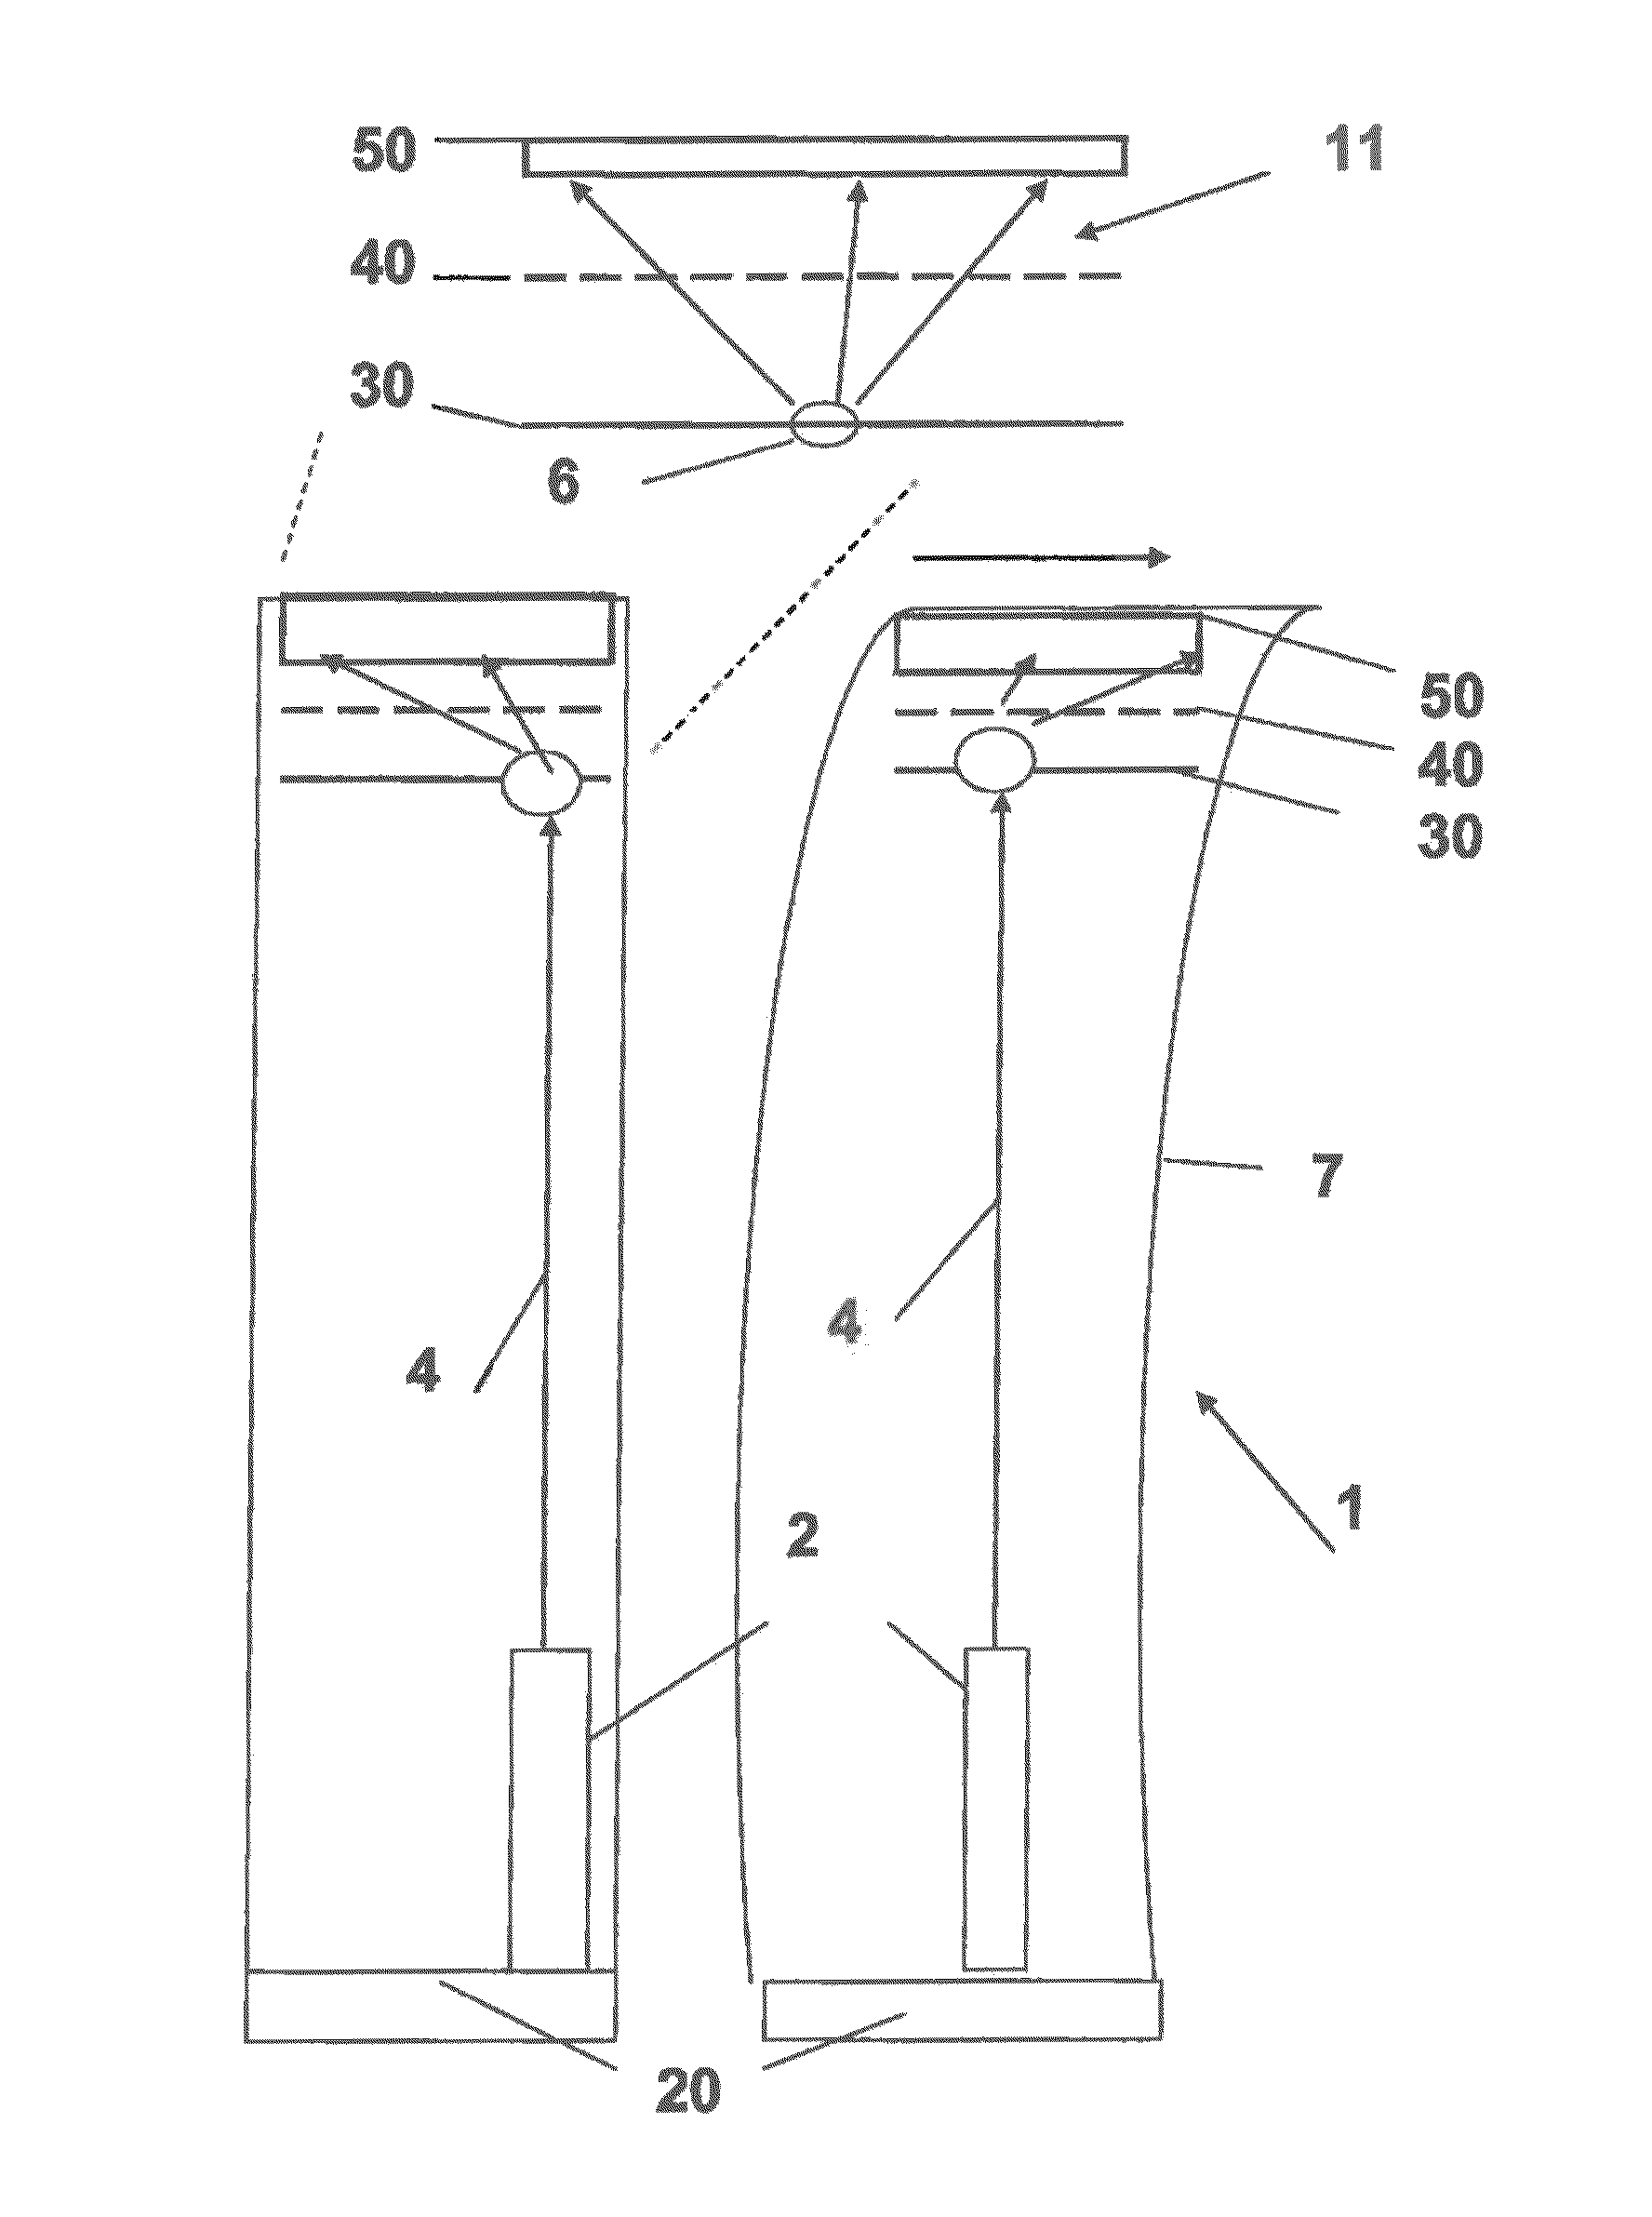 Positioning device comprising a light beam